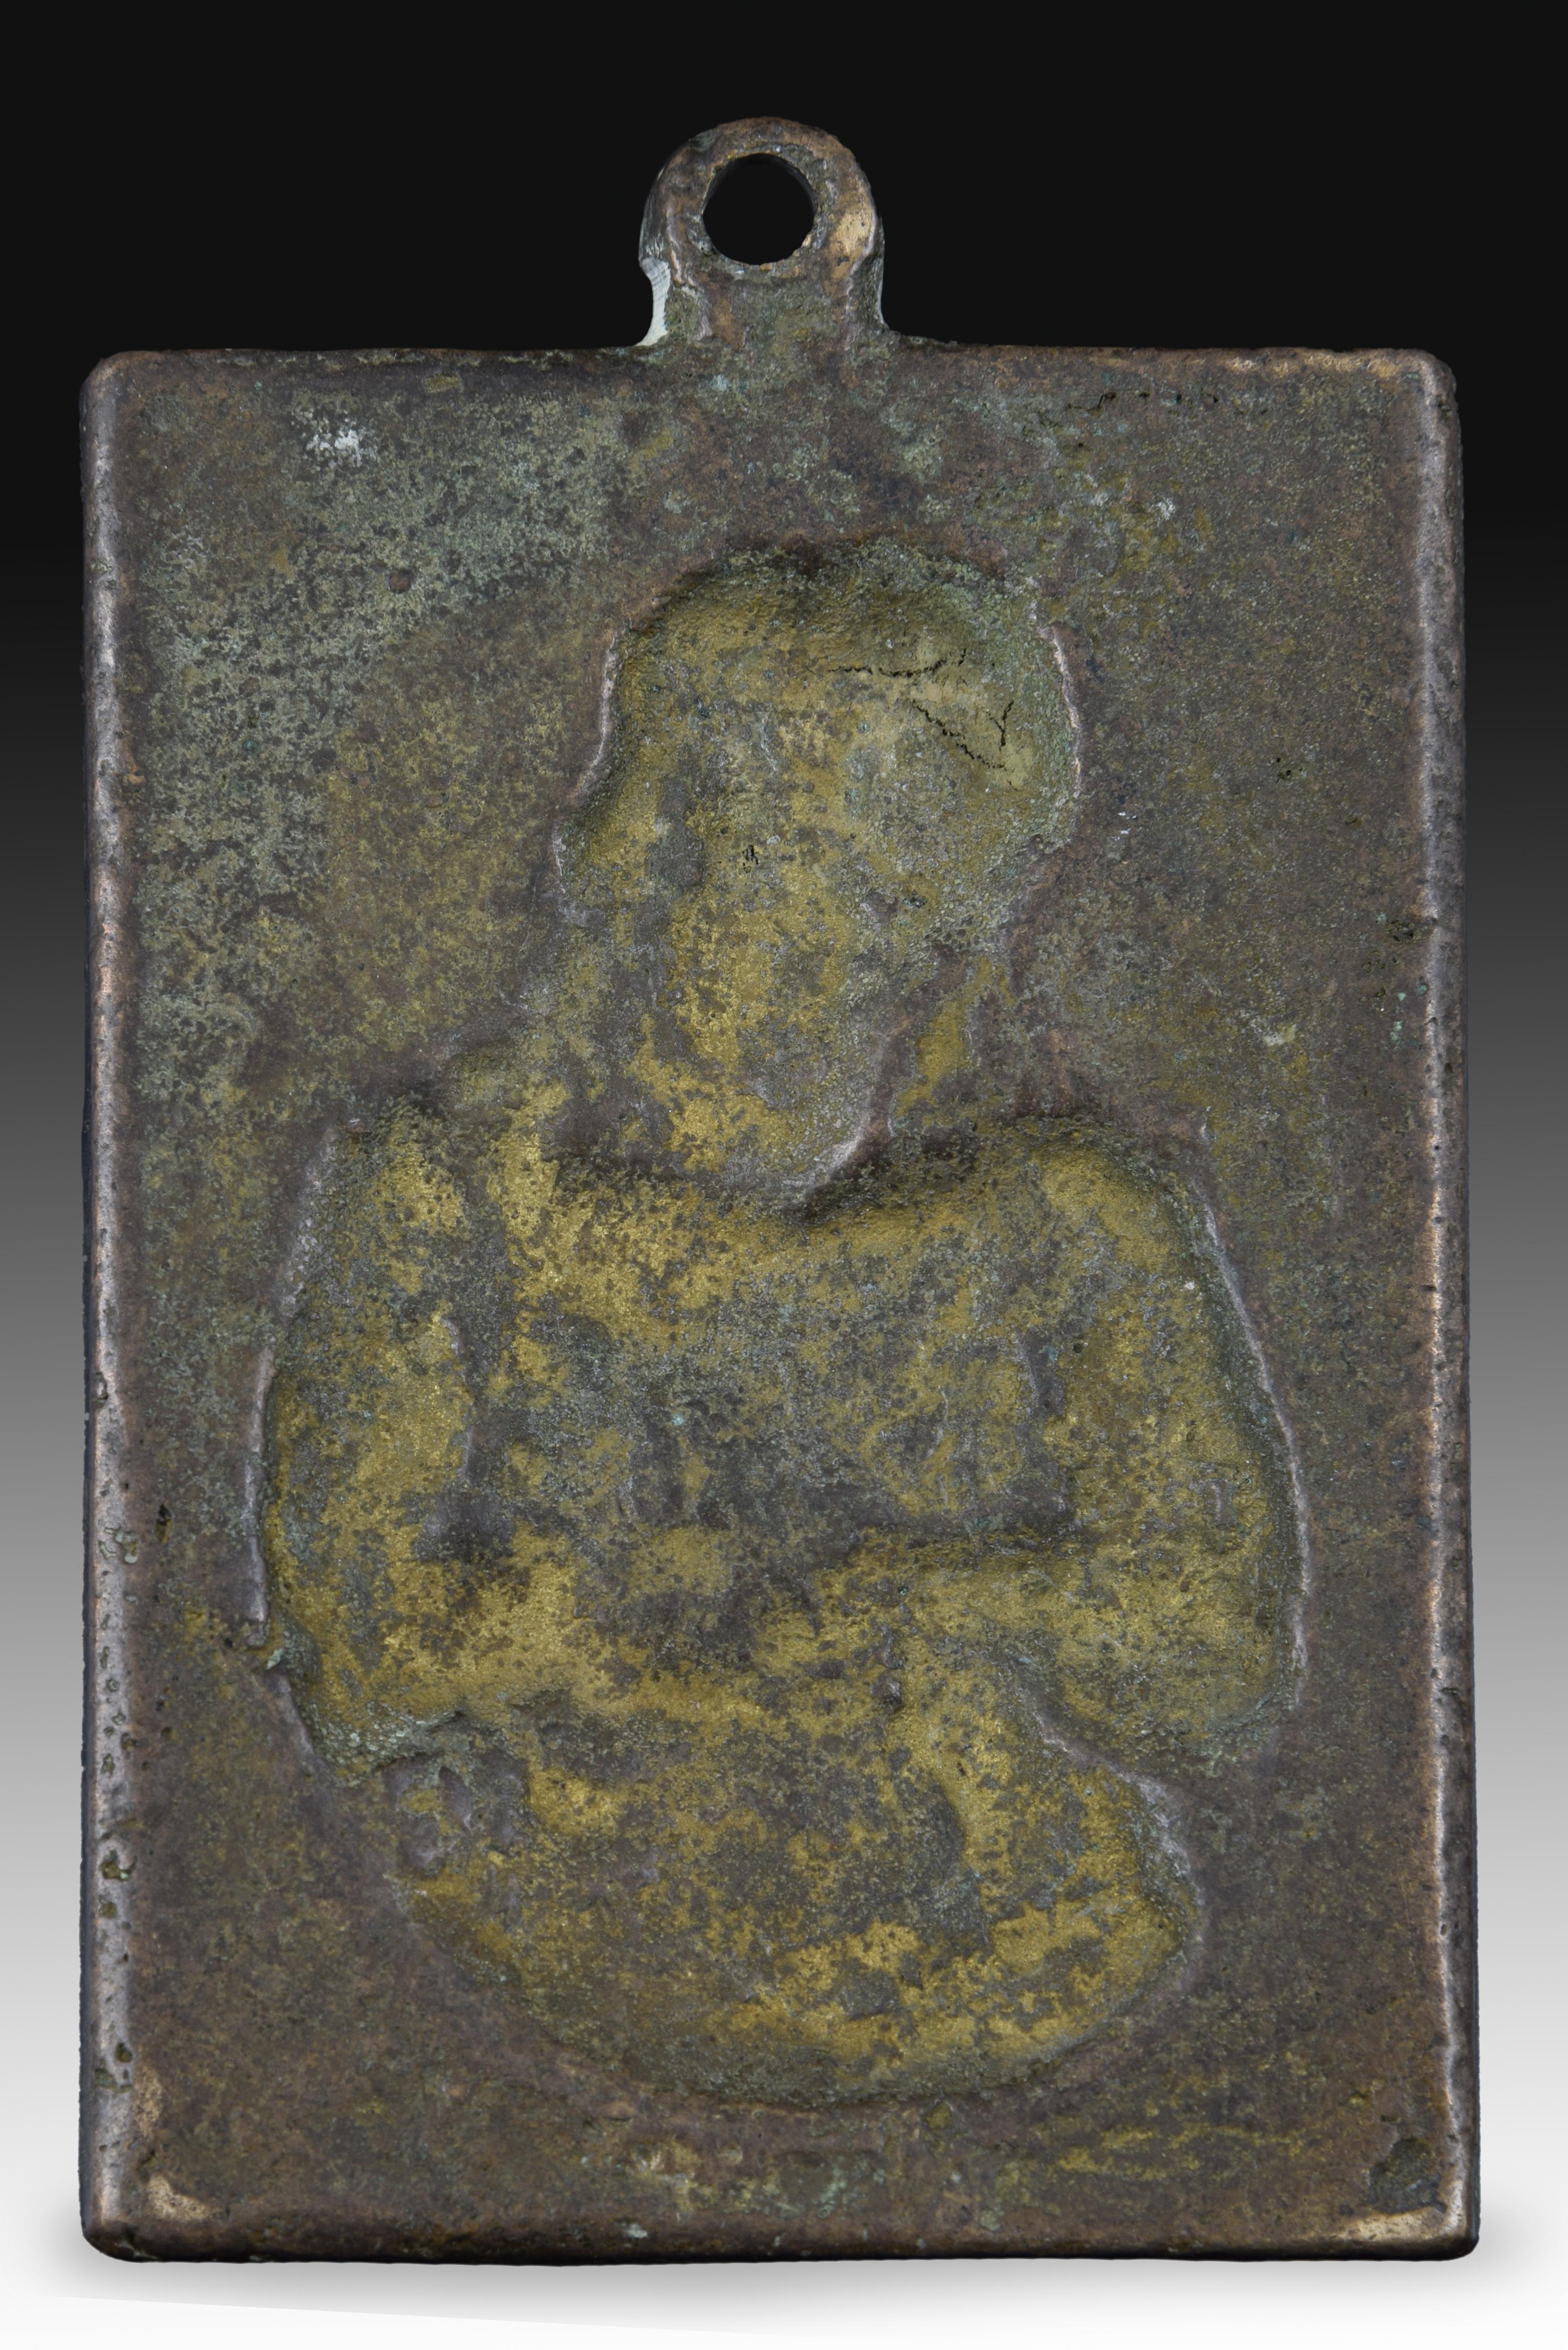 Devotional plaque, Ecce Homo. Bronze, XVII century.
Rectangular devotional plate that shows an image of Christ up to the waist, with the crown of thorns, a crozier, and the hands tied in front, in a very popular and appreciated iconography in the